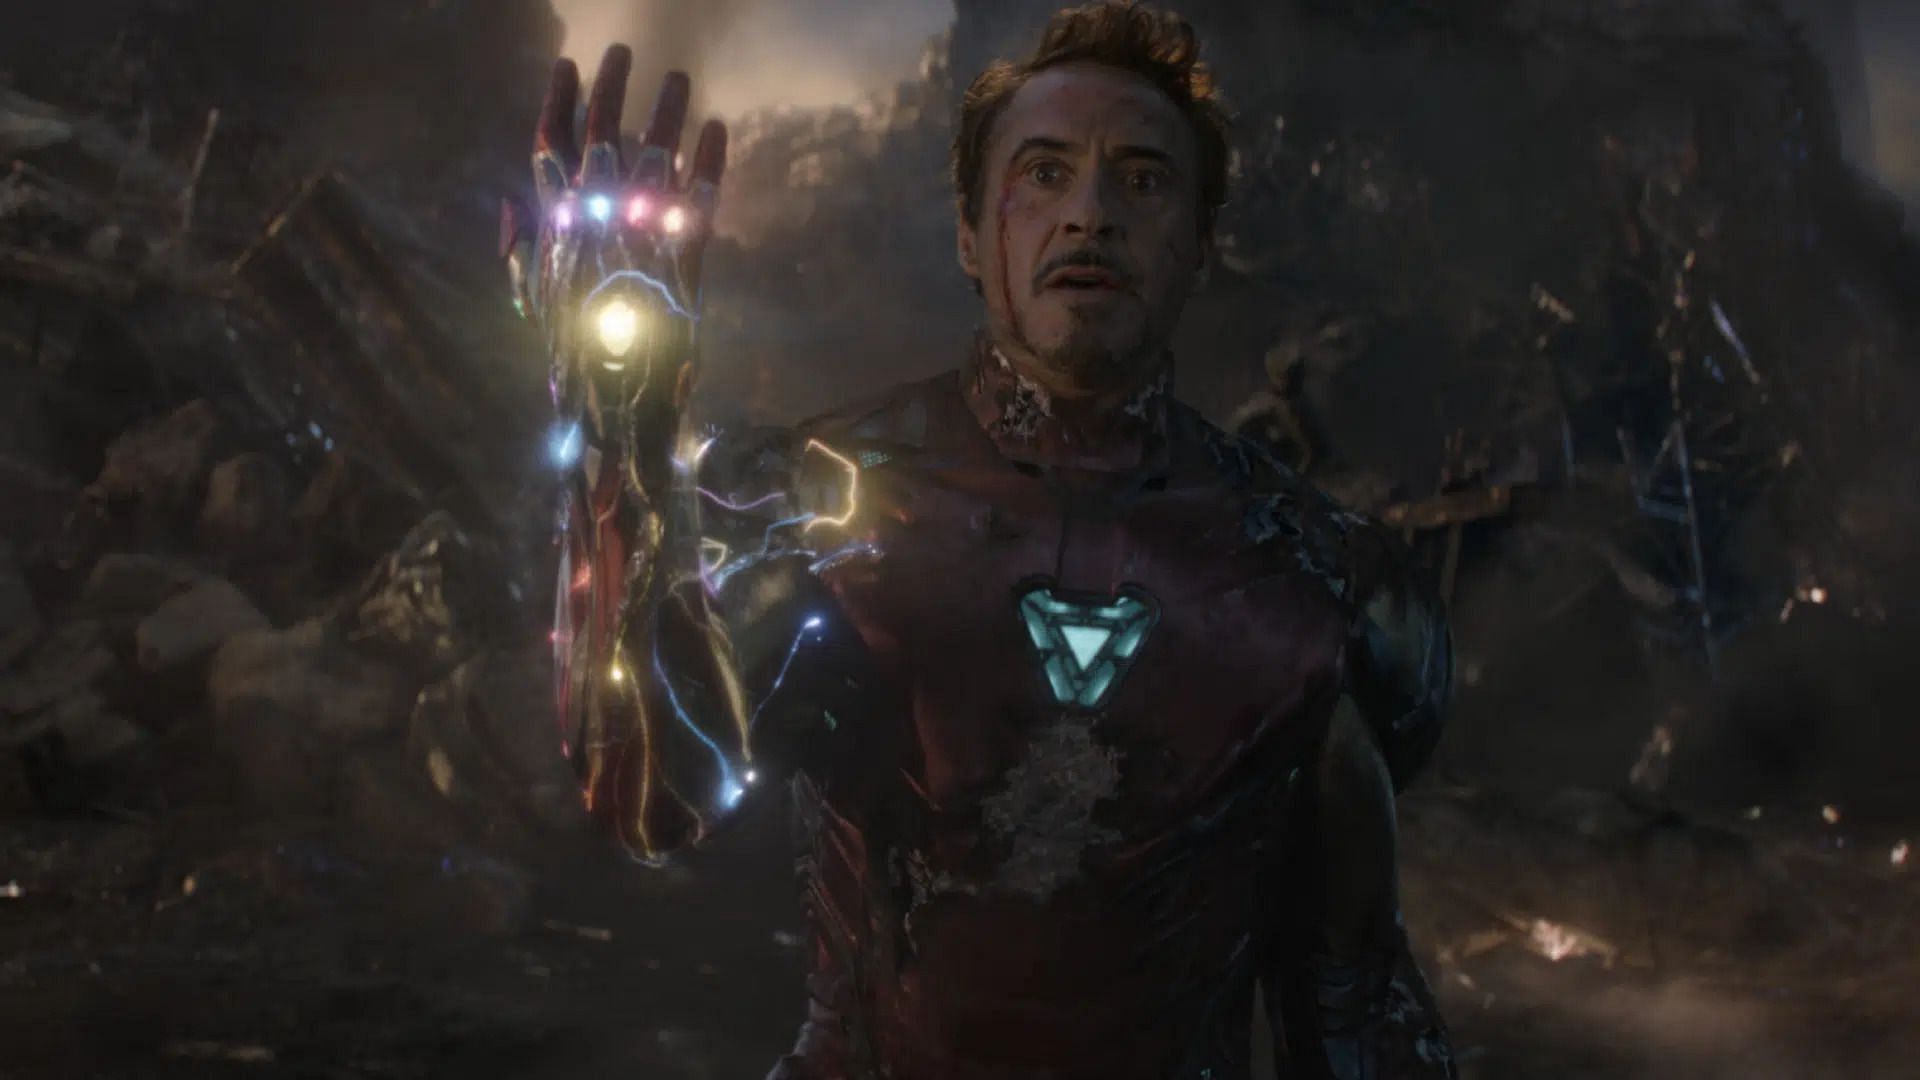 Iron Man is back in the Marvel Cinematic Universe in ways nobody imagined